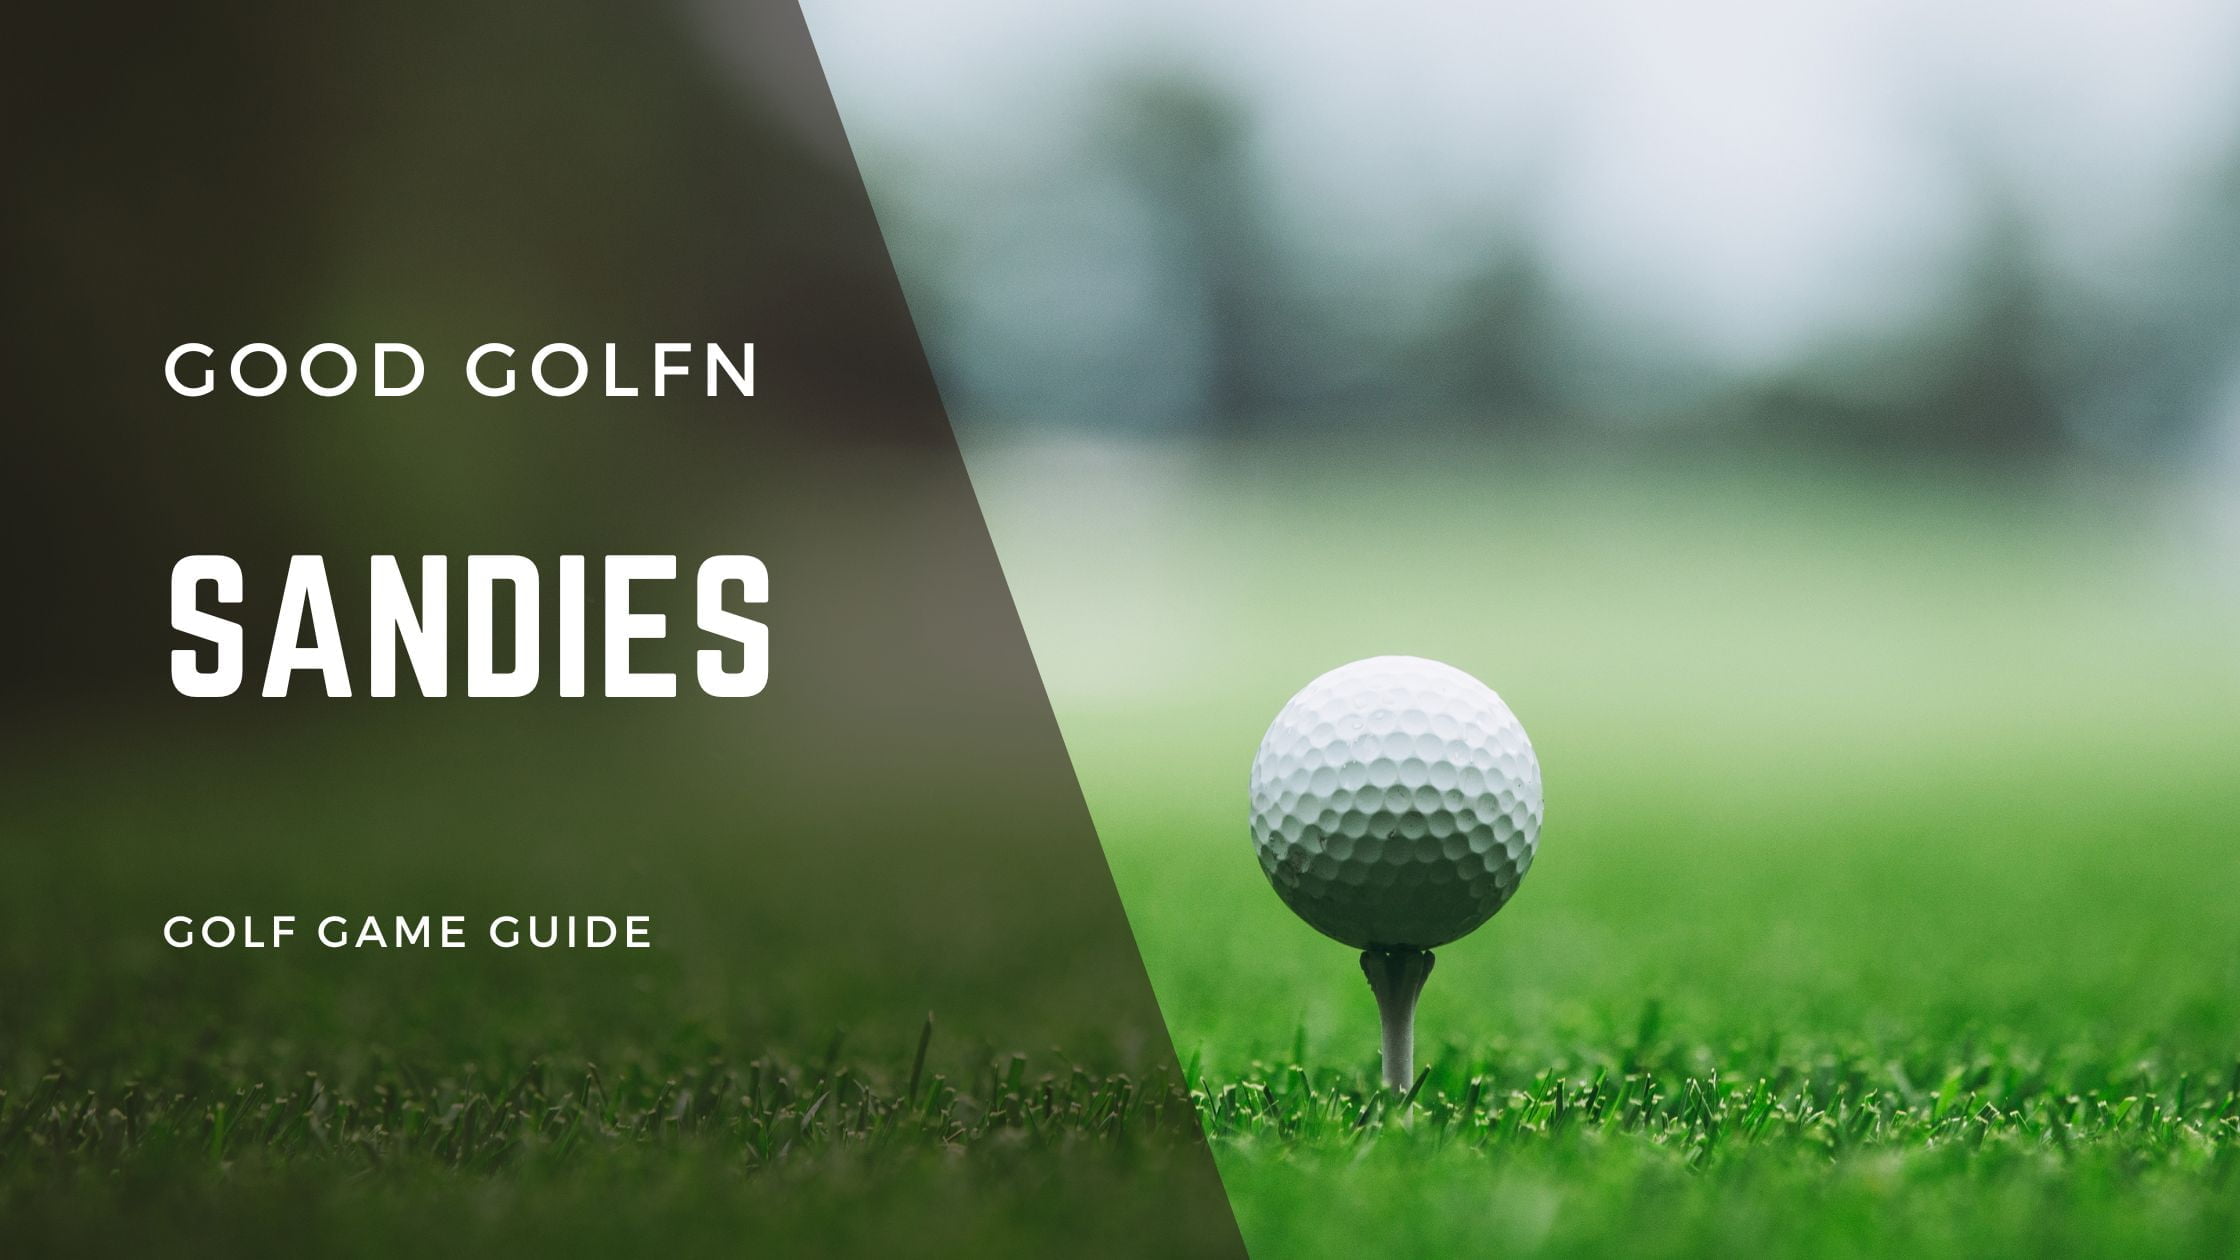 Master the art of sandies golf with this comprehensive guide! Dive deep into the history, perfect your bunker shots, and boost your sand save percentage.